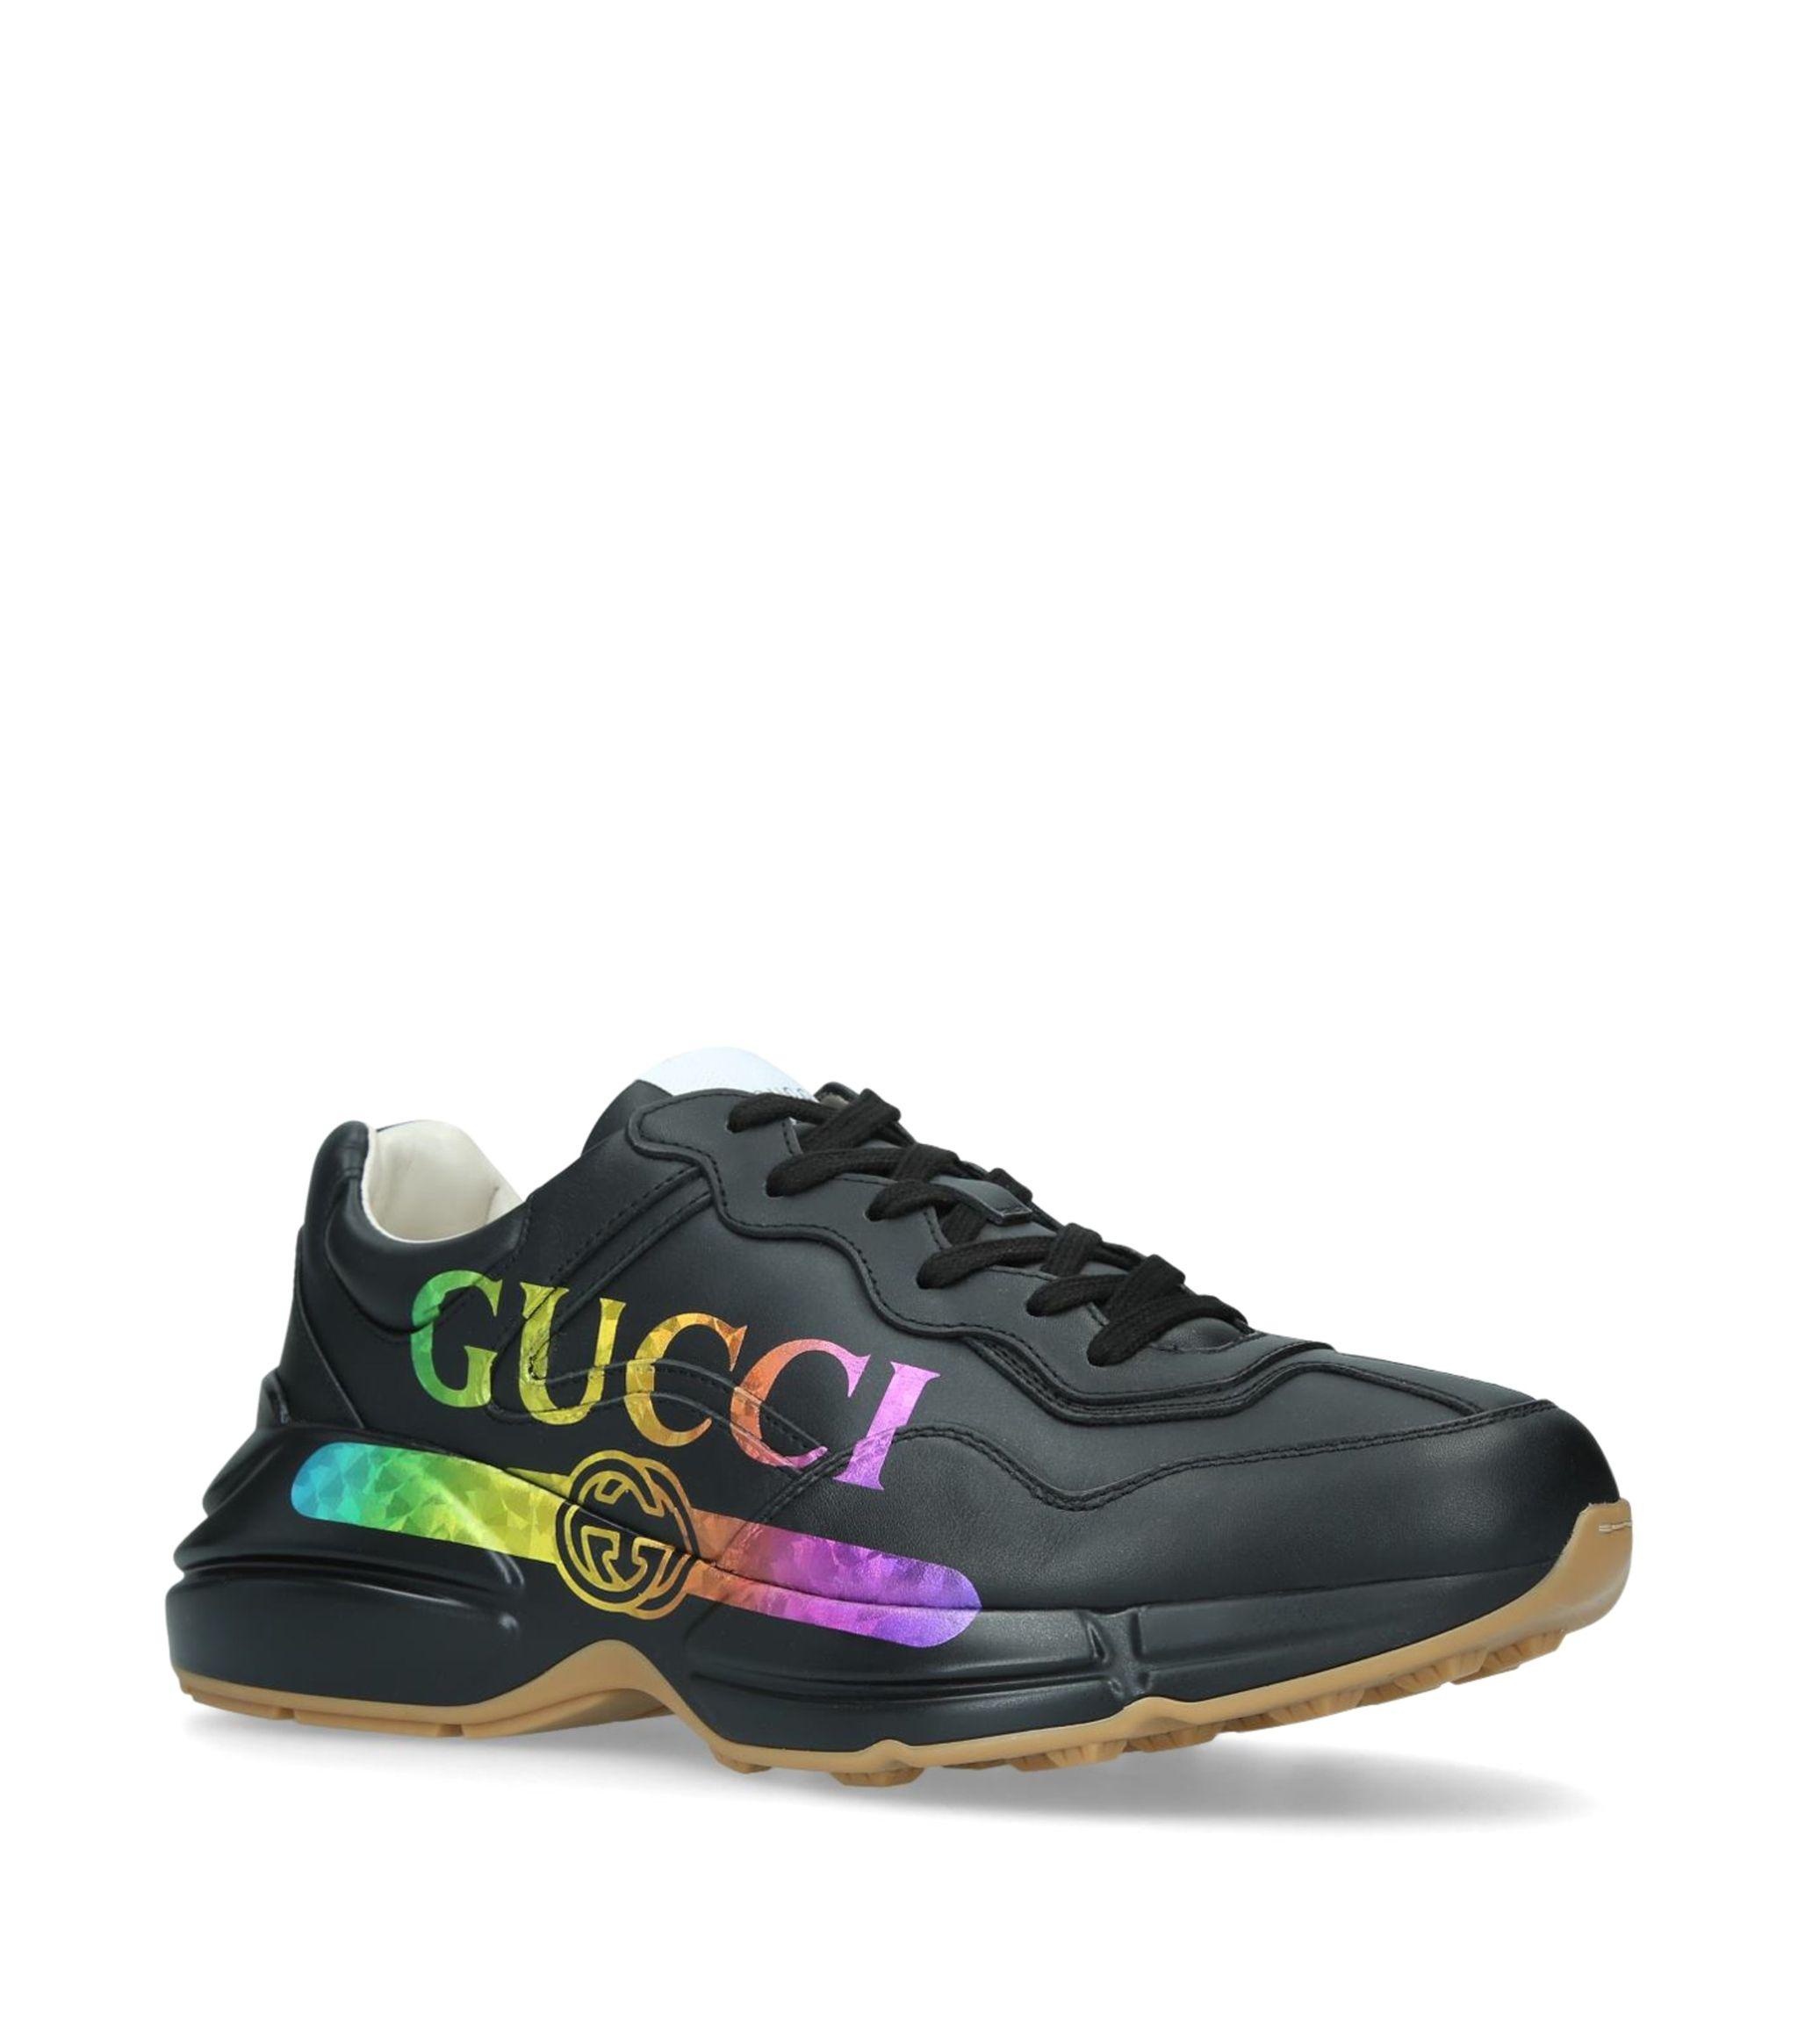 Gucci Leather Rainbow Rhyton Sneakers for Men - Lyst